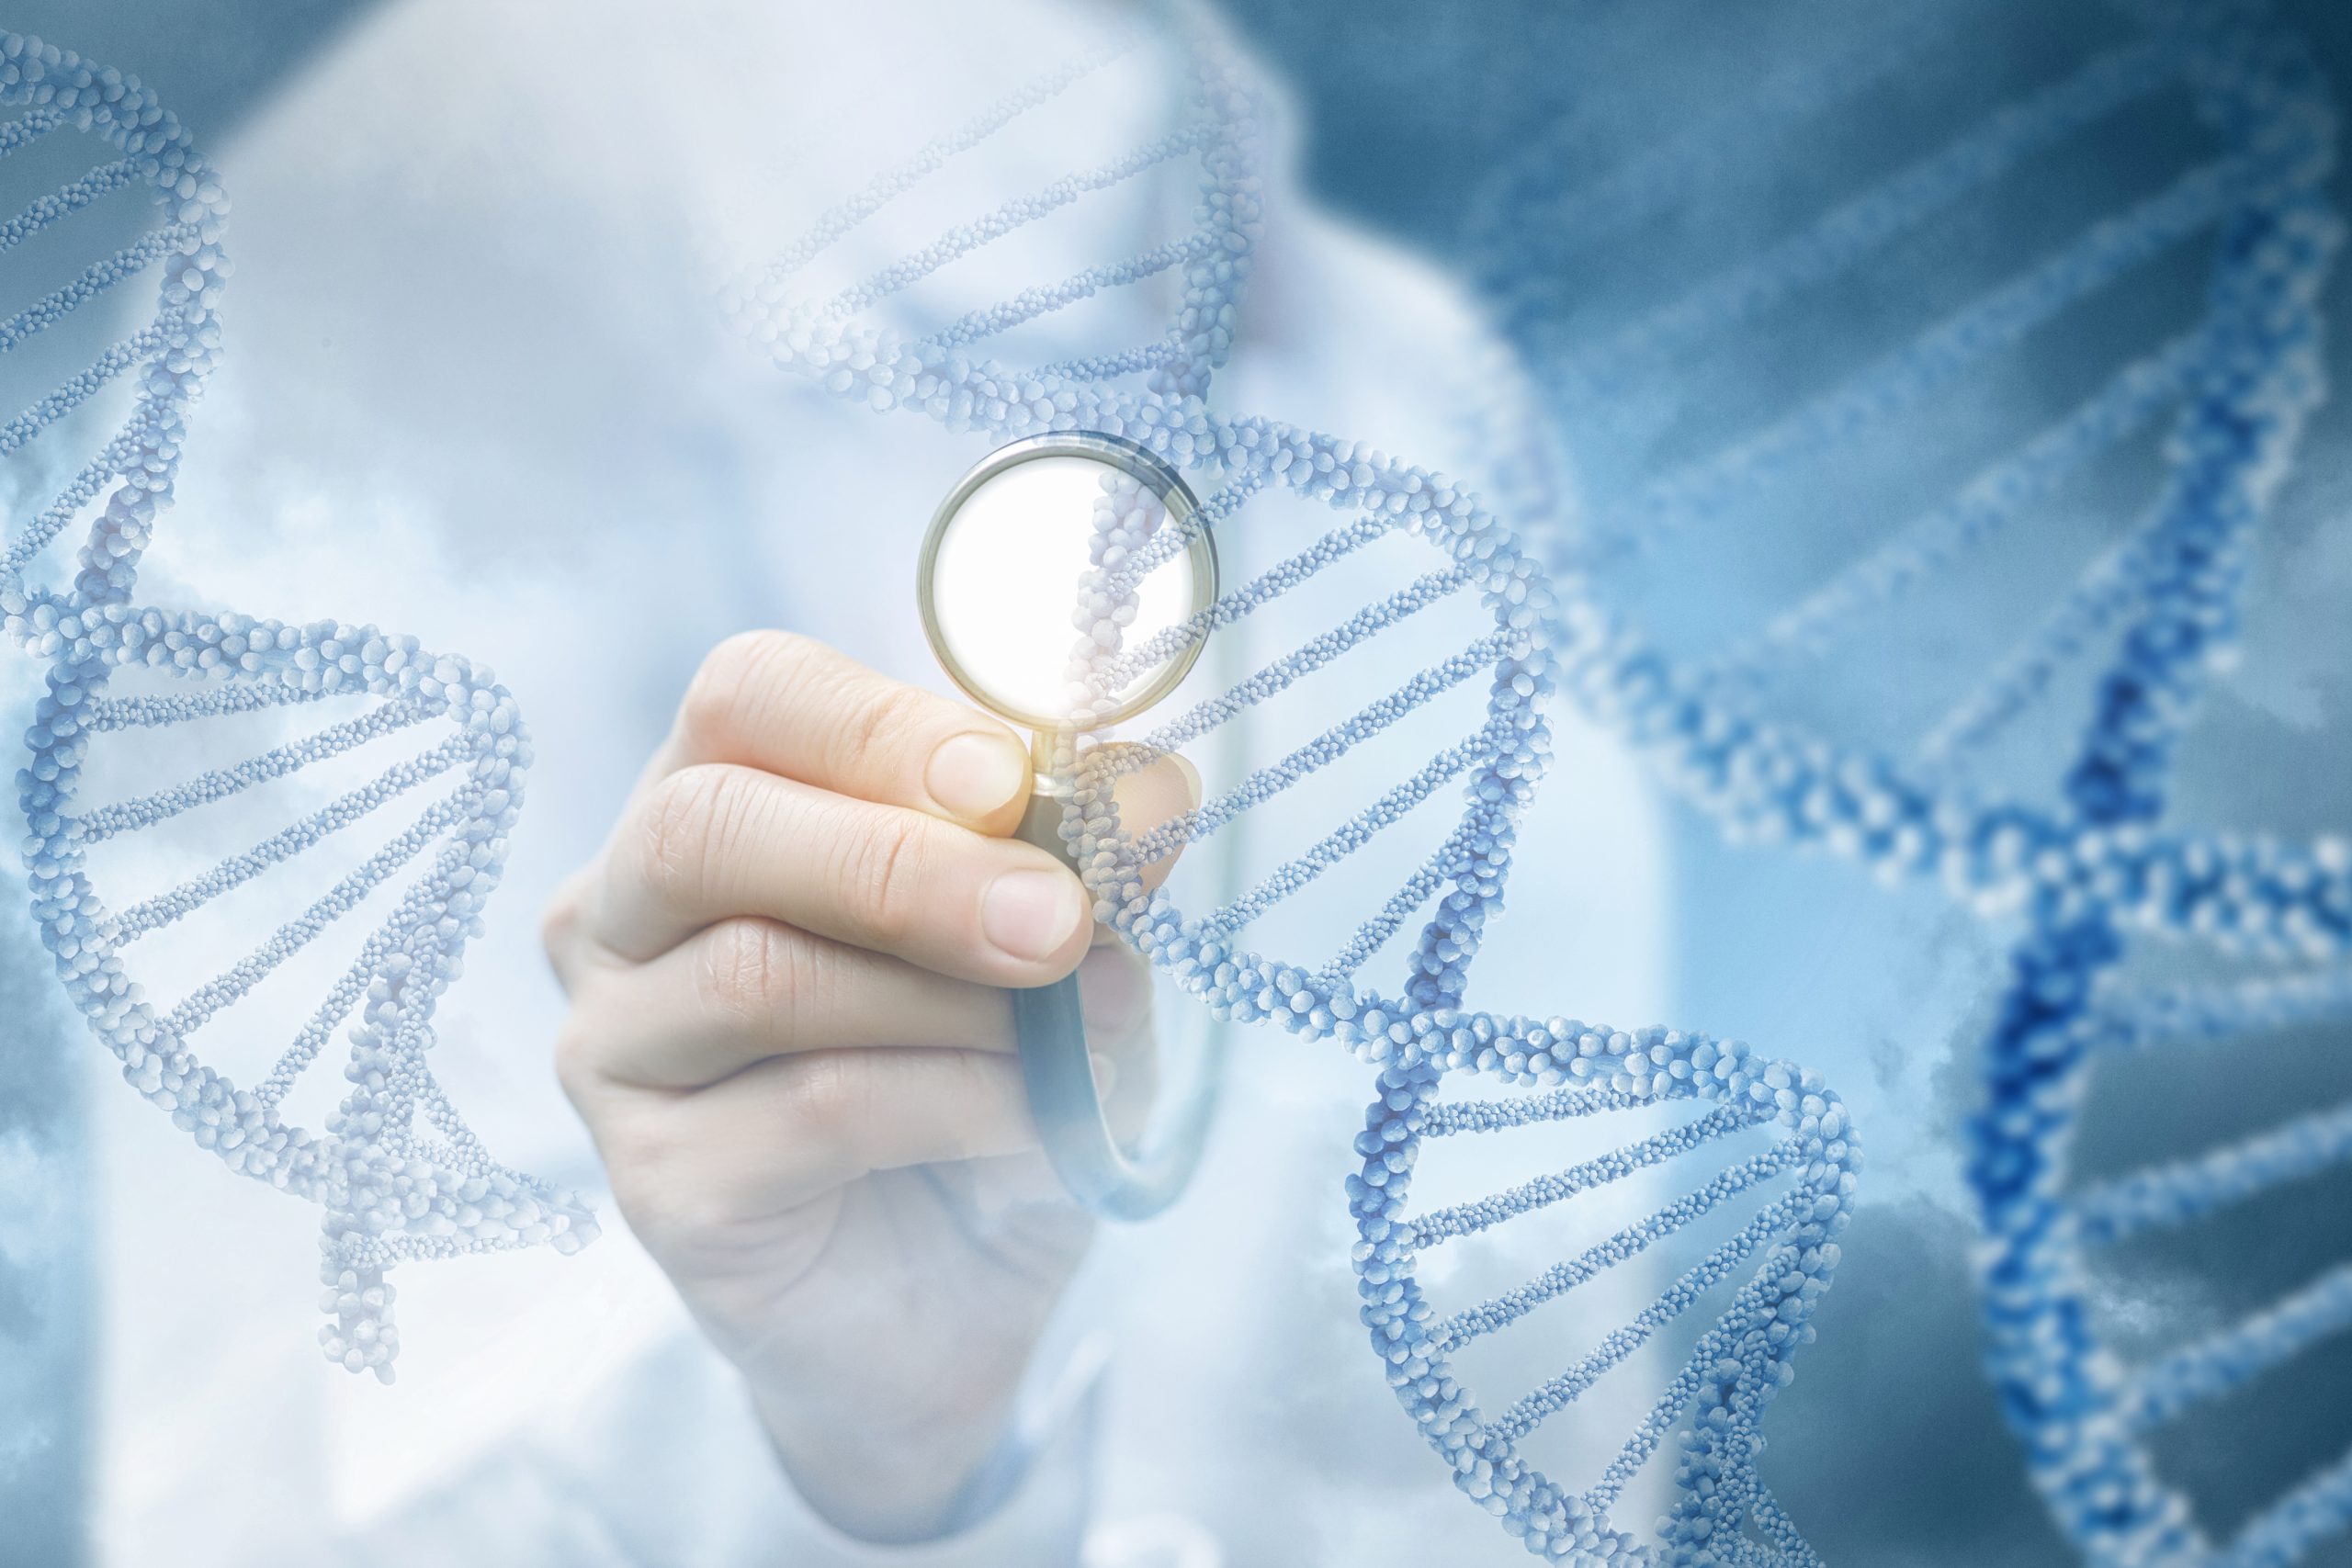 The role of genetics and genetic laboratory in the diagnosis and treatment of infertility